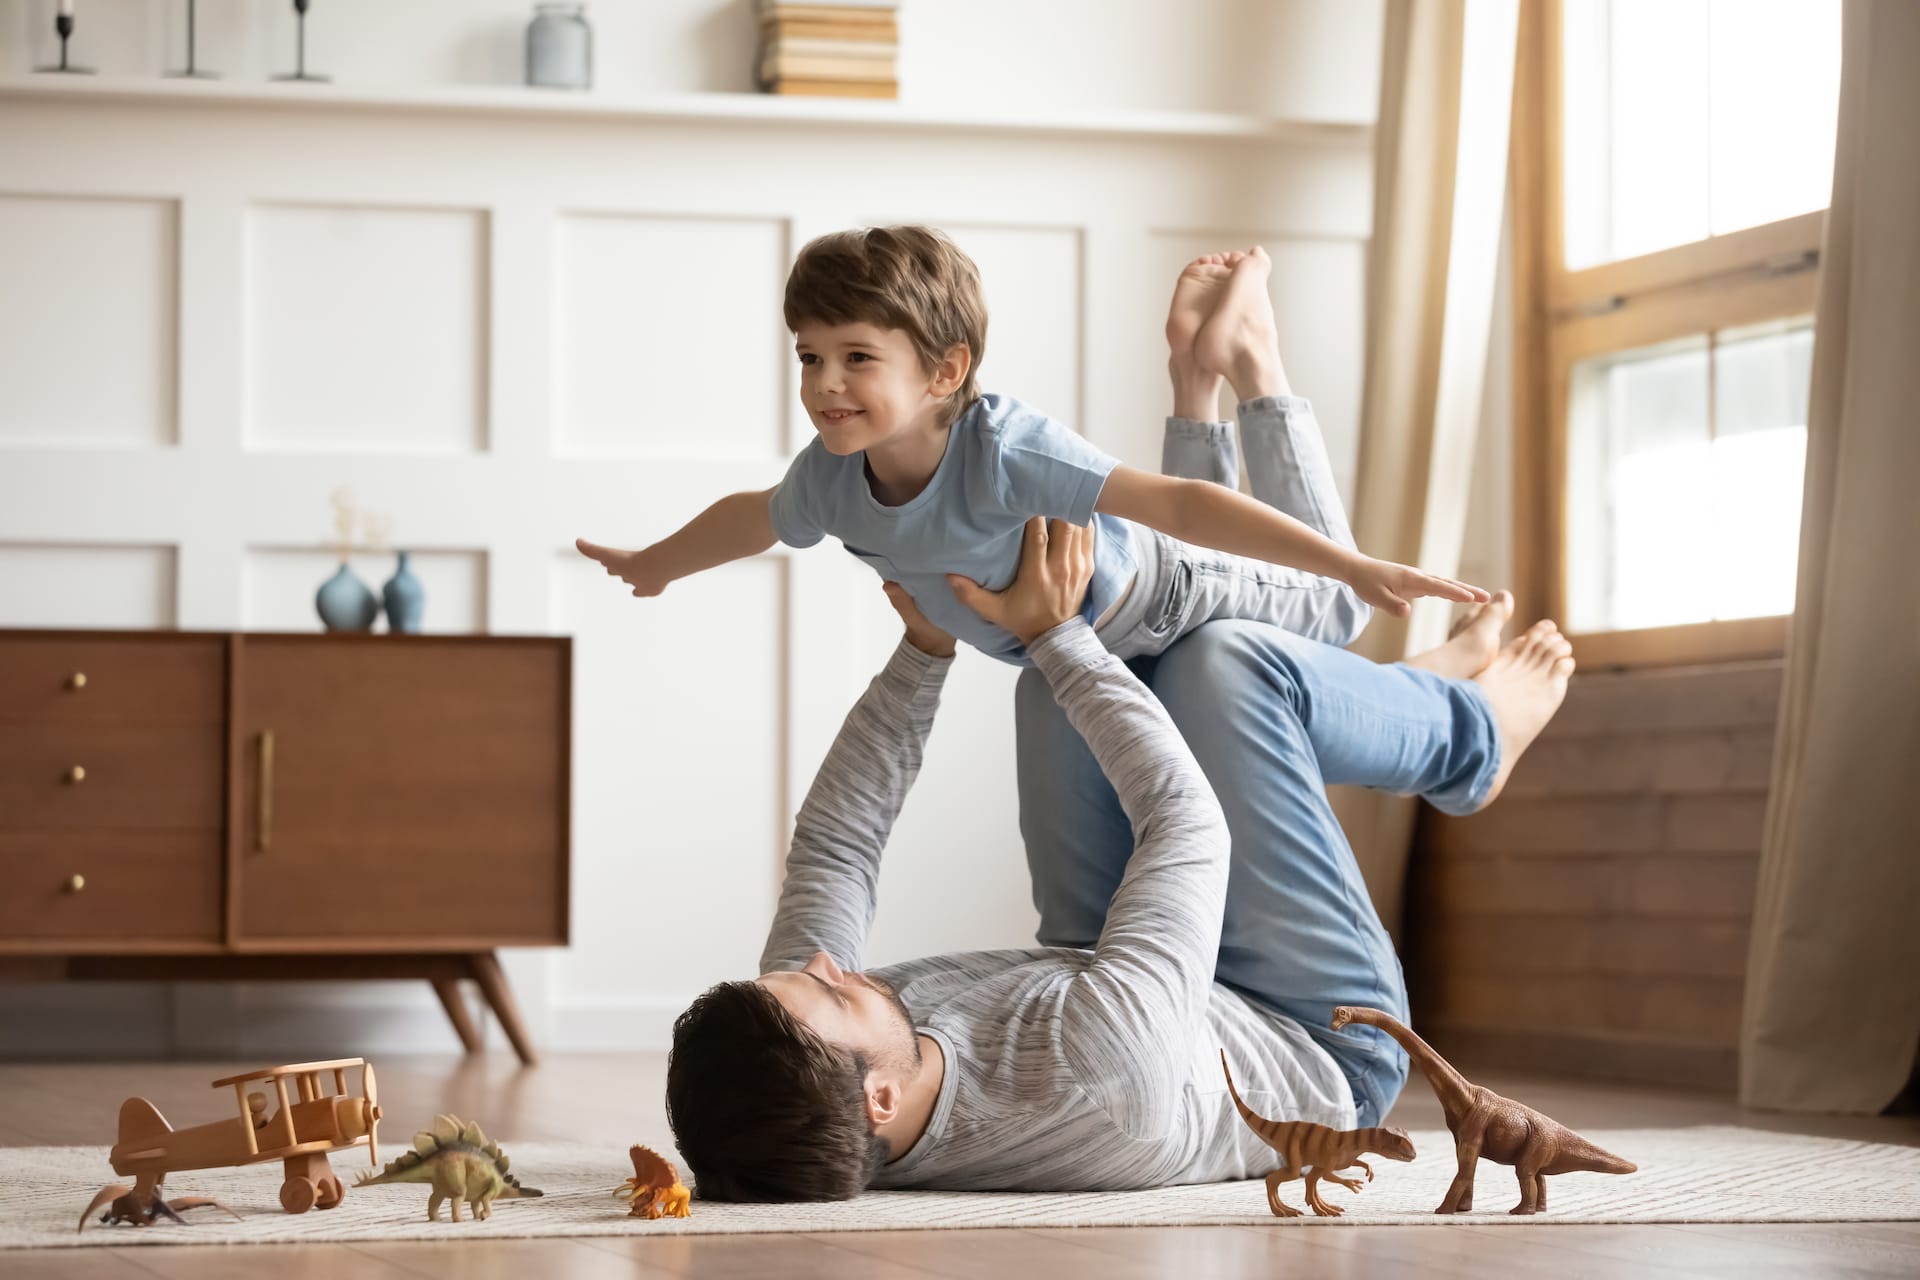 A father lying on the floor of a living room lifting up his young son as they play together.